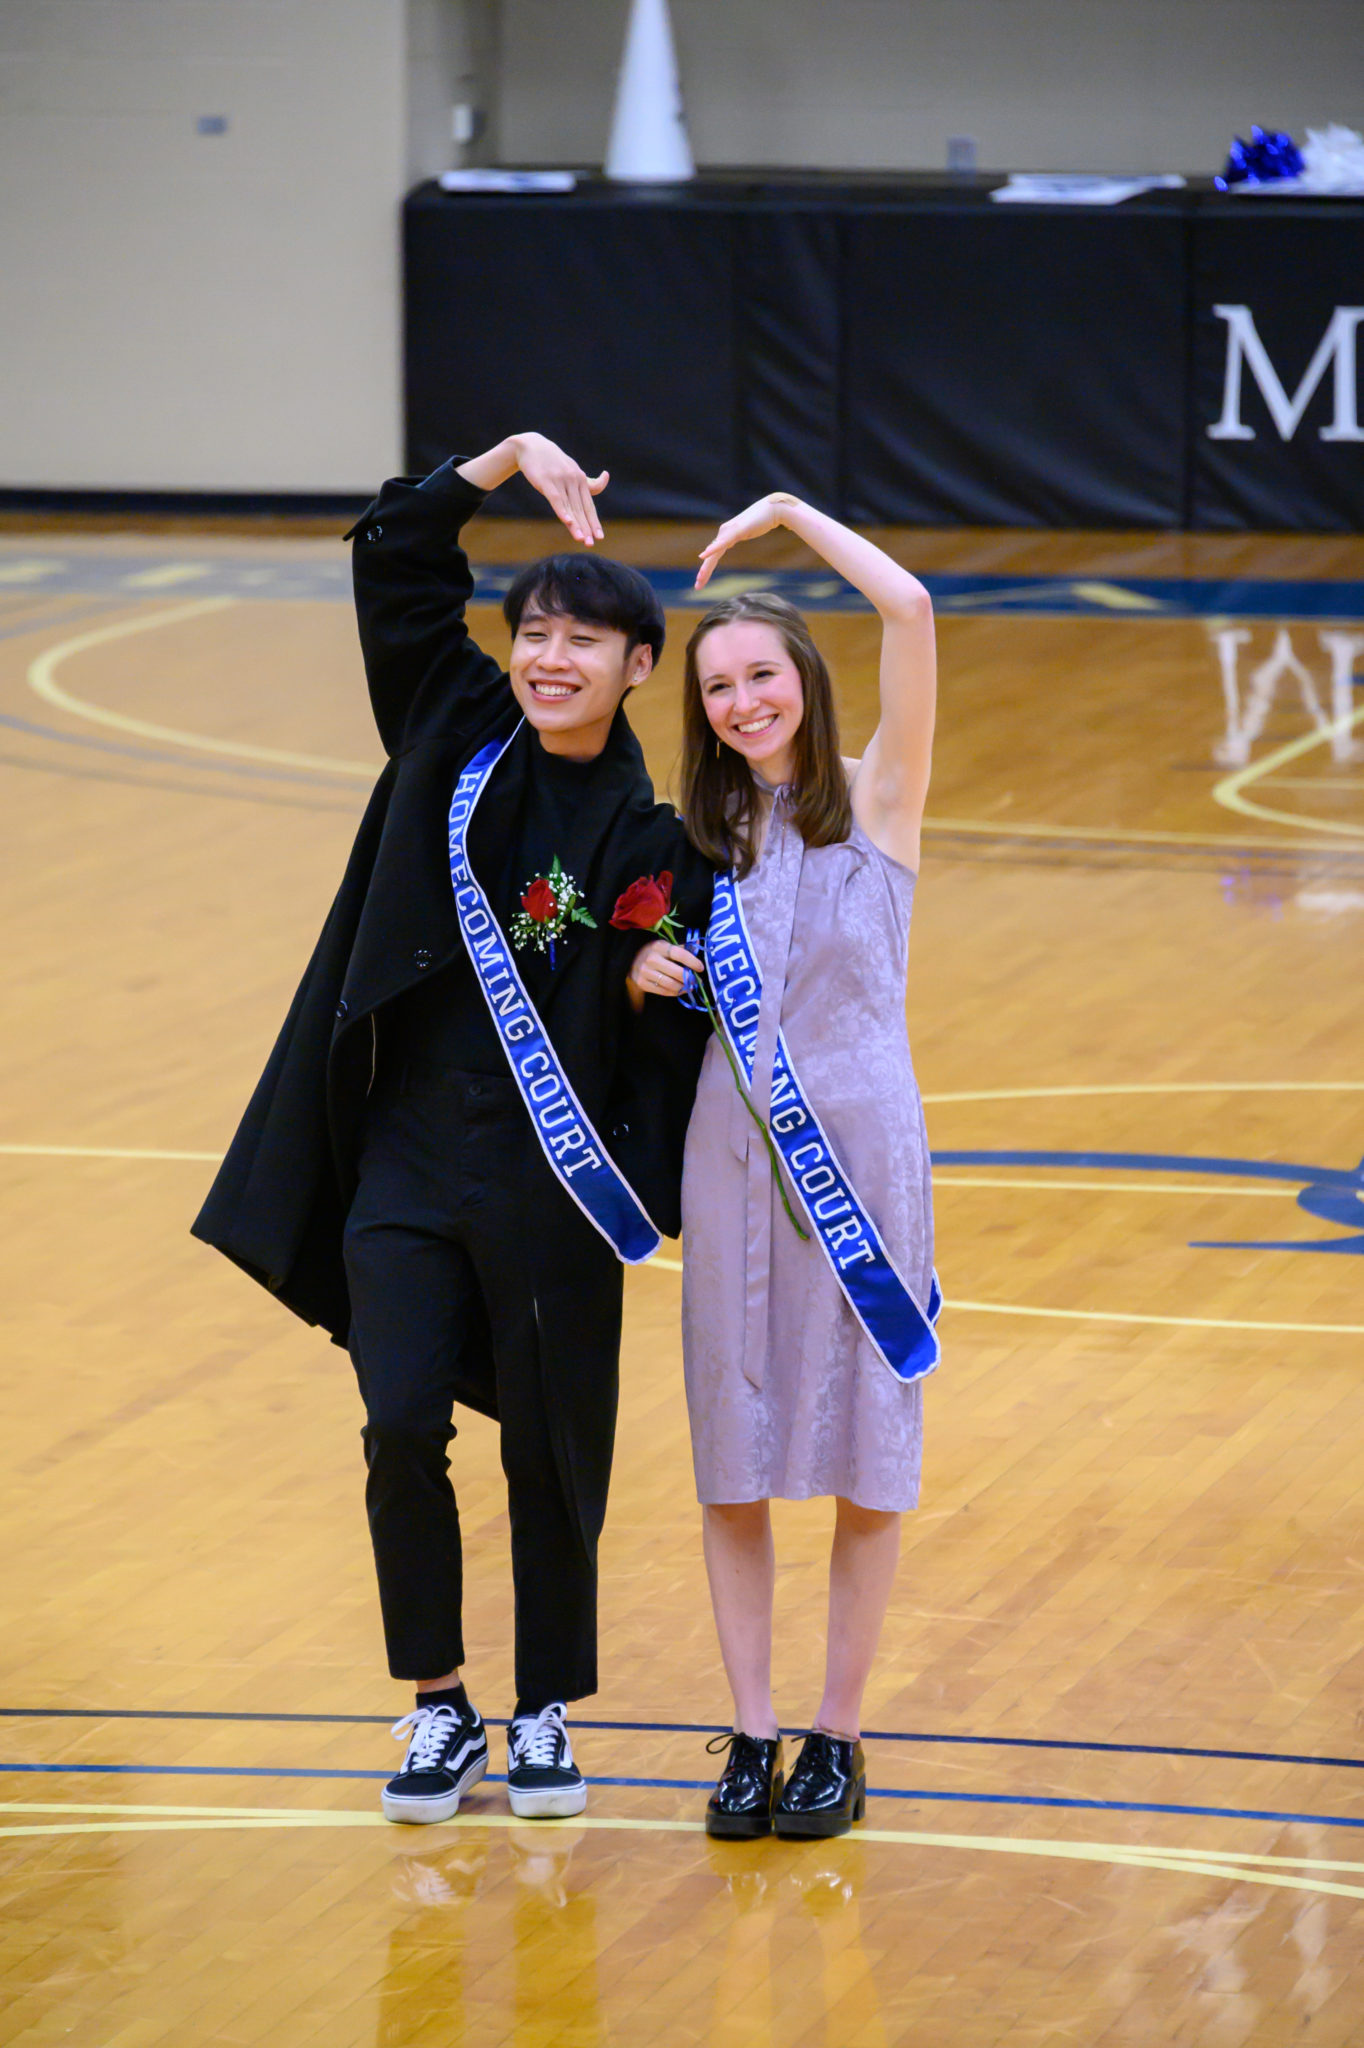 Two students pose during the Homecoming ceremony